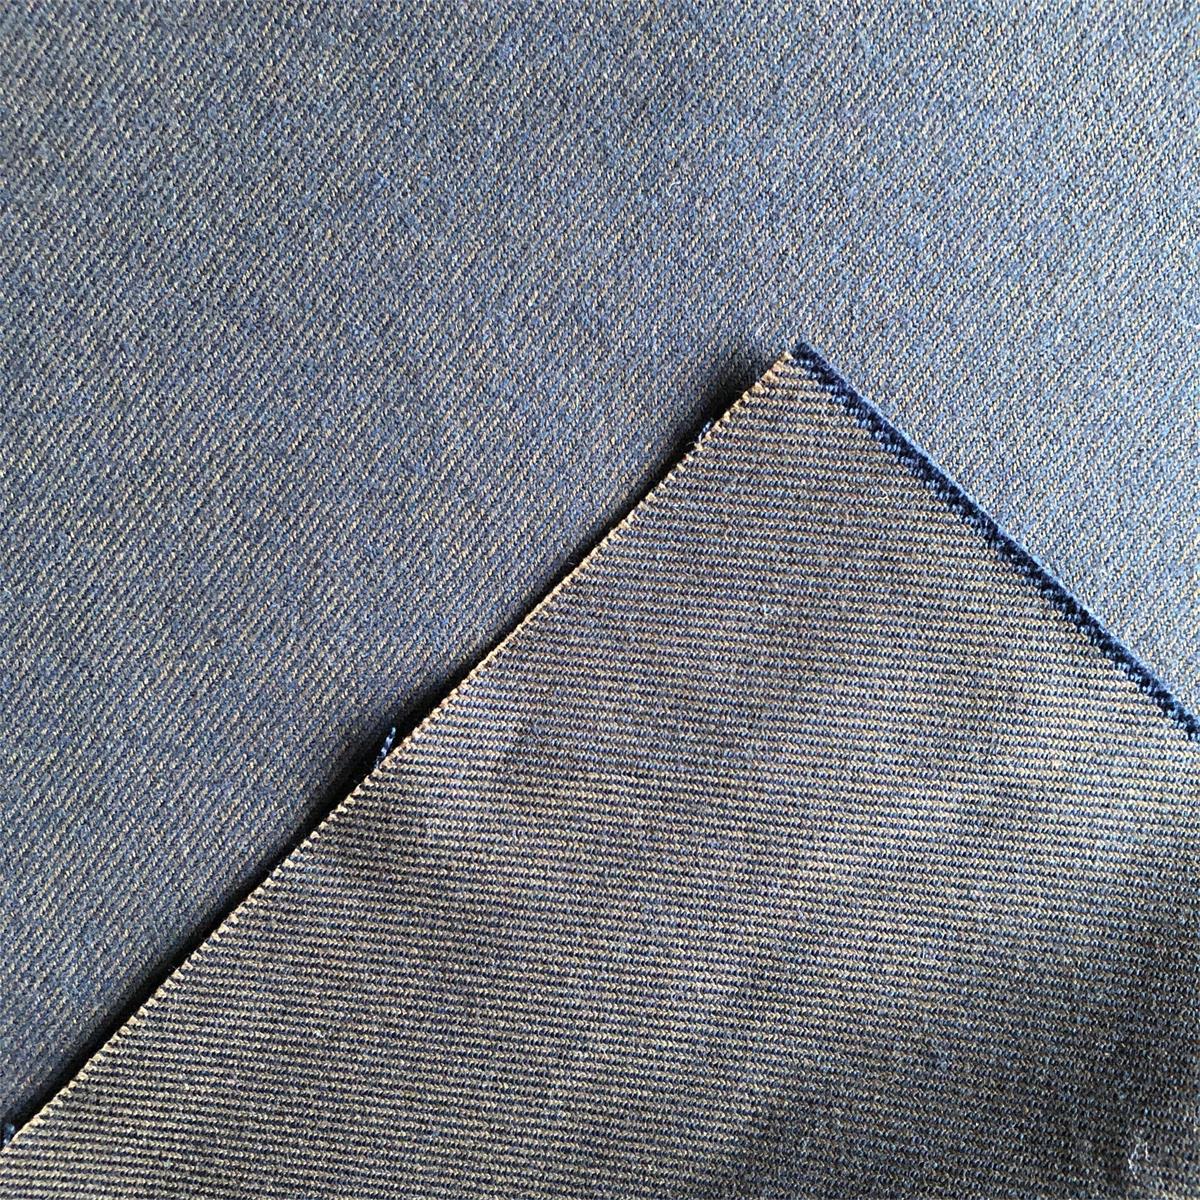 Cotton Flannel Fabric for men's casual shirts by twisted yarn 100% cotton yarn dyed twill chambray brushed shirts woven fabric